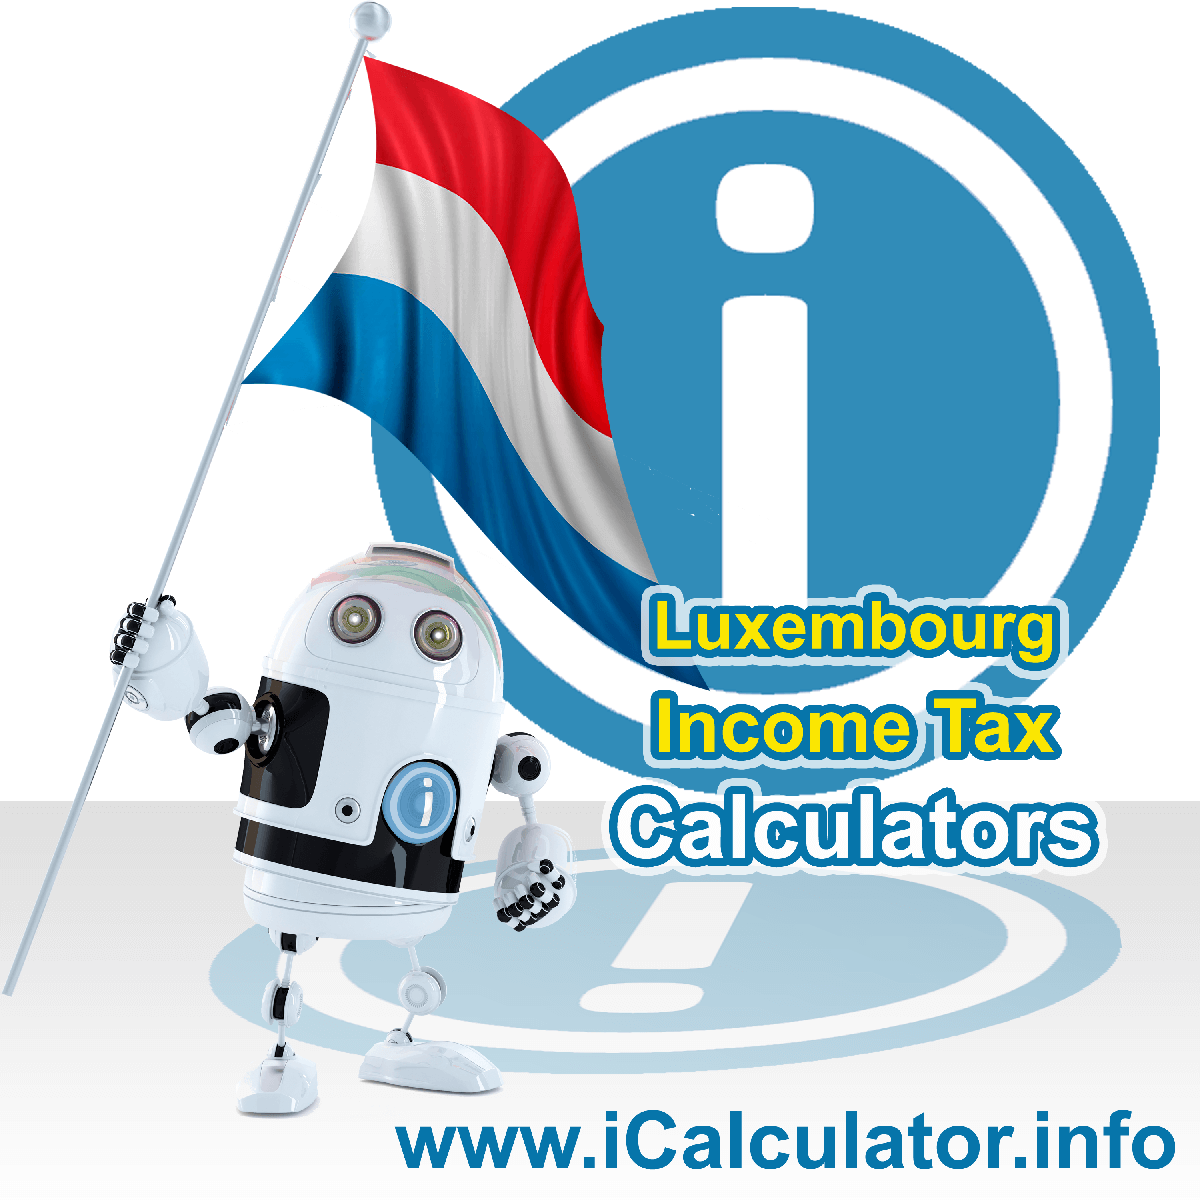 Luxembourg Income Tax Calculator. This image shows a new employer in Luxembourg calculating the annual payroll costs based on multiple payroll payments in one year in Luxembourg using the Luxembourg income tax calculator to understand their payroll costs in Luxembourg in 2022